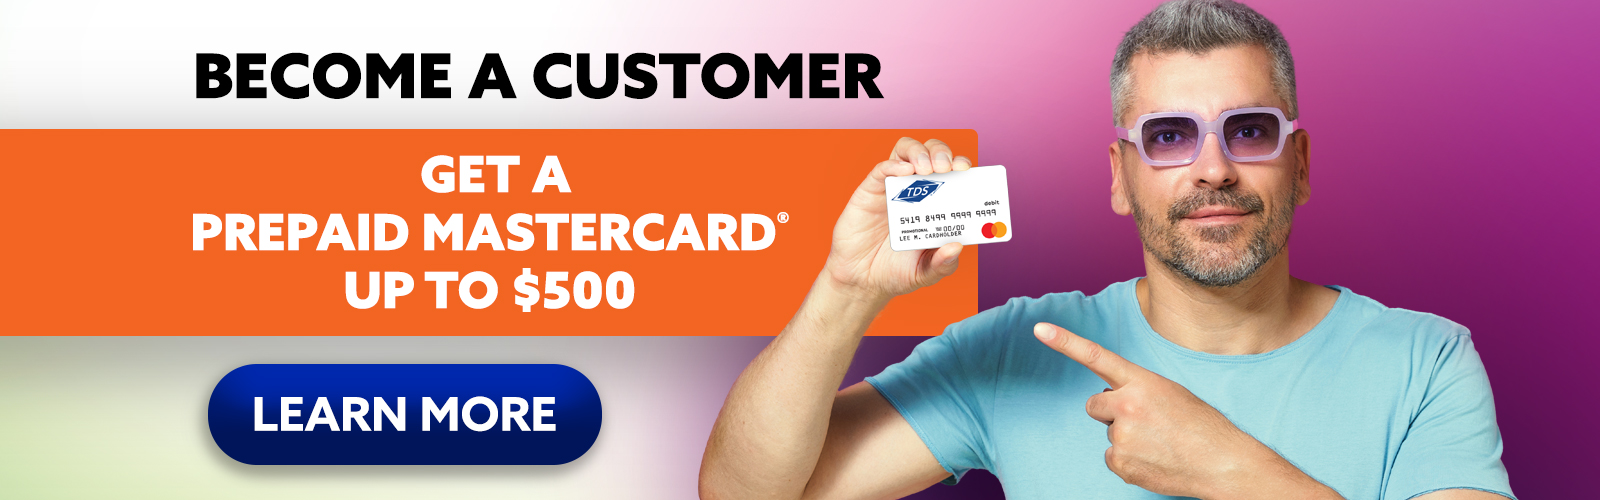 Add TDS TV+ and get a prepaid Mastercard up to $500. Call 1-844-425-8266 to learn more. 